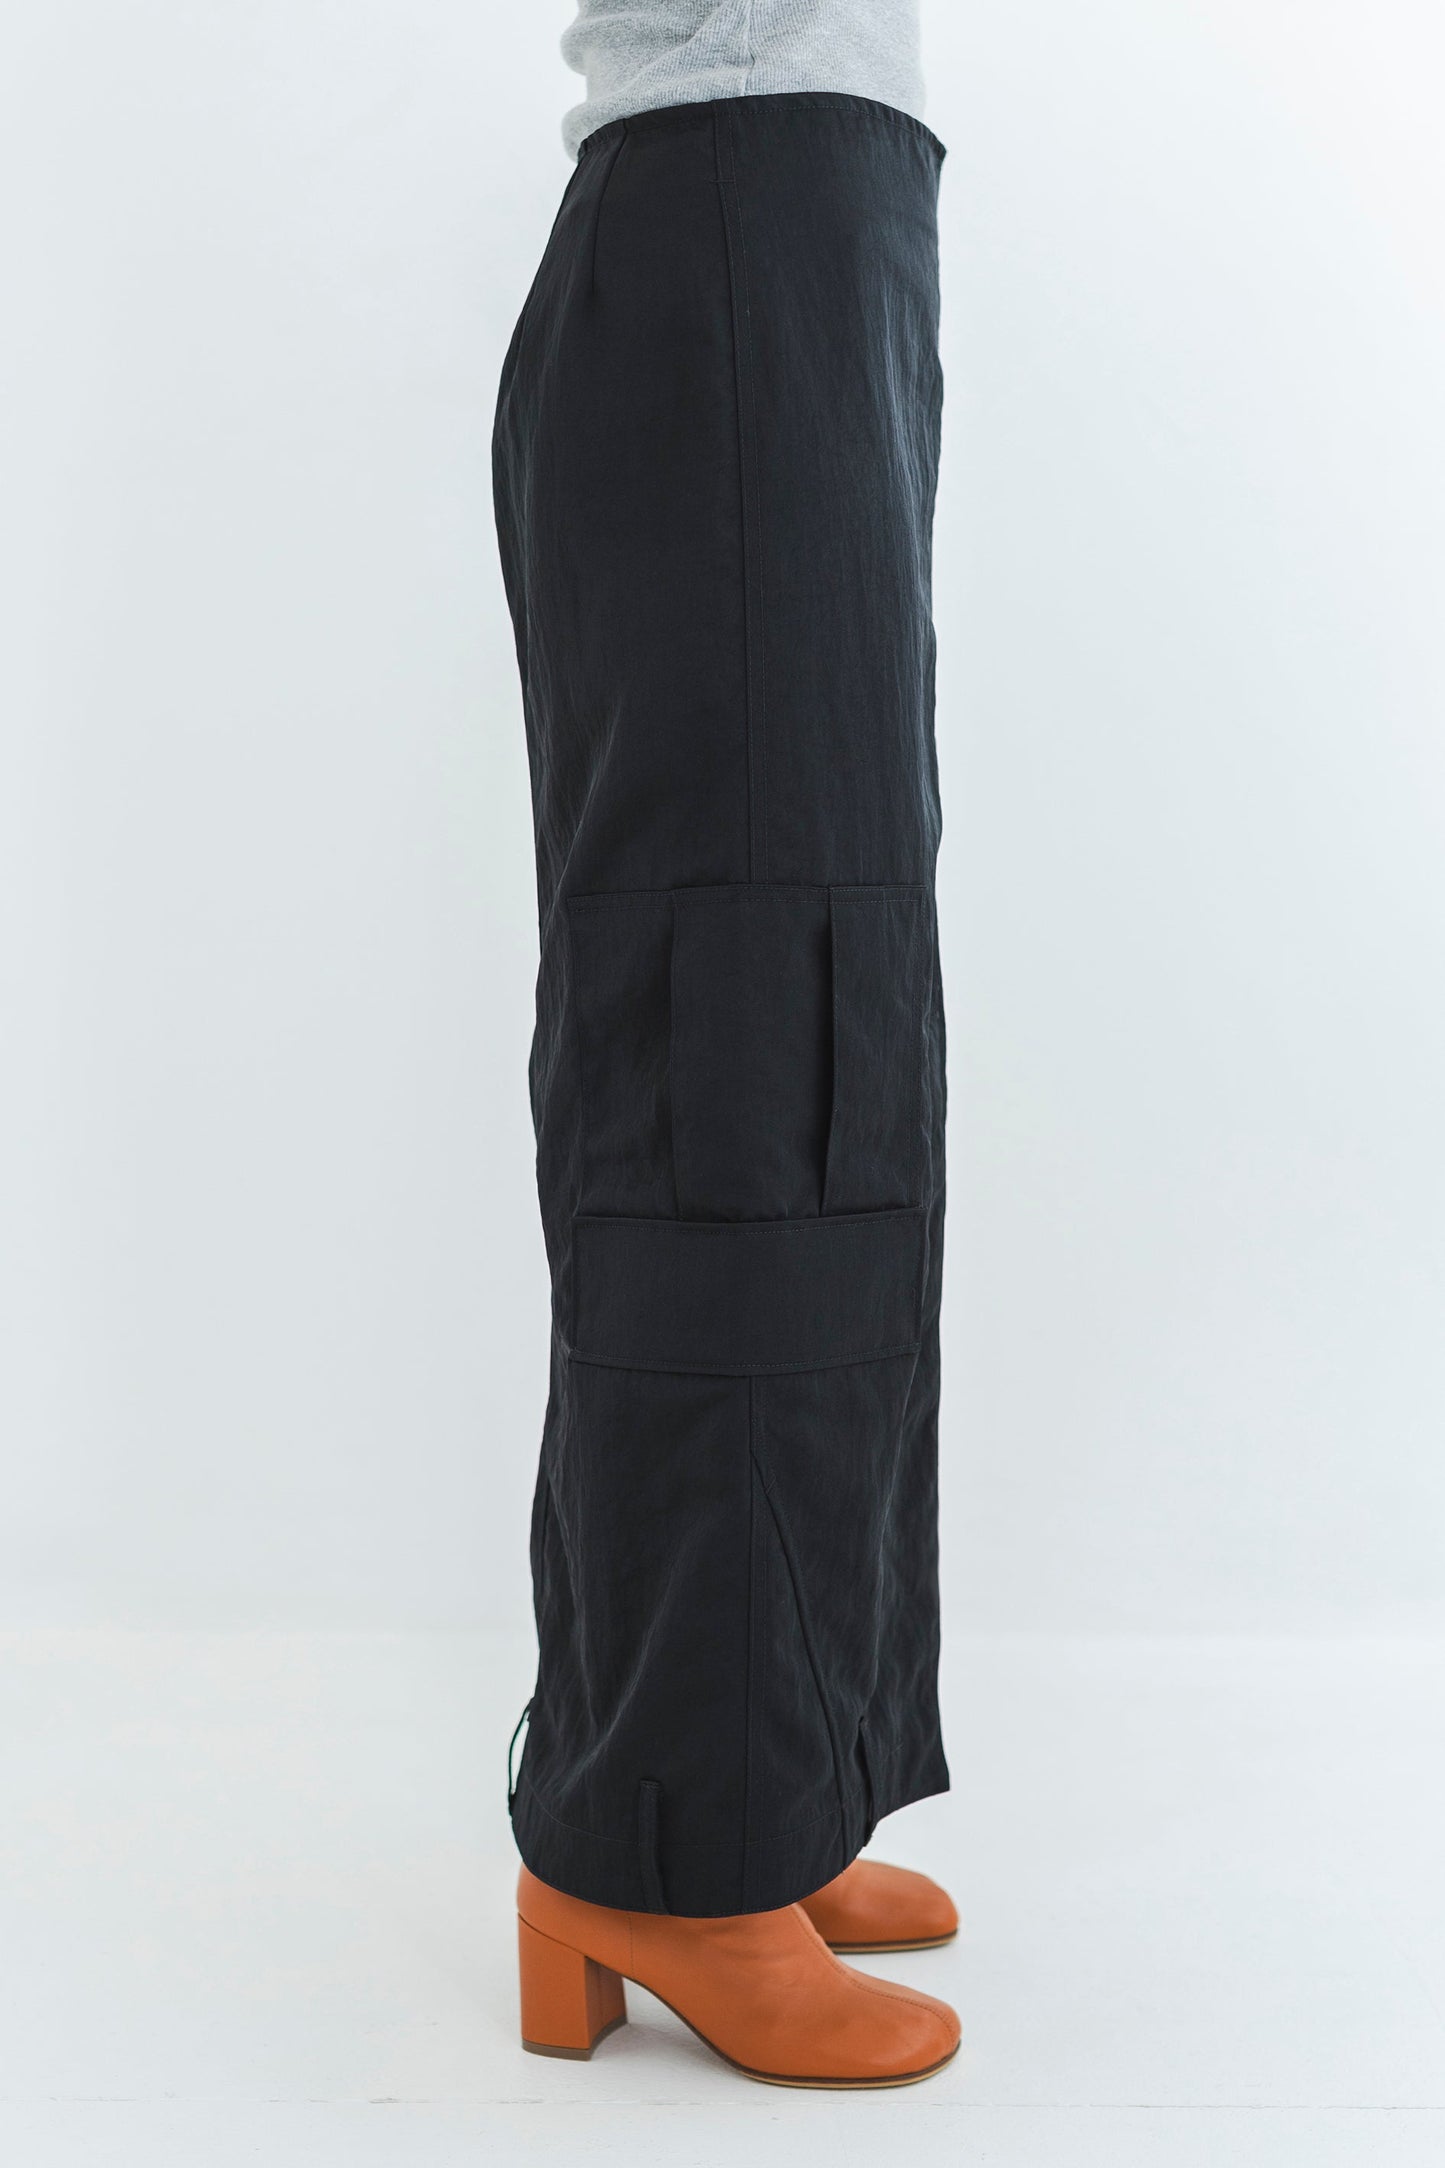 ARMY UPSIDE-DOWN SKIRT （WATER REPELLENT）